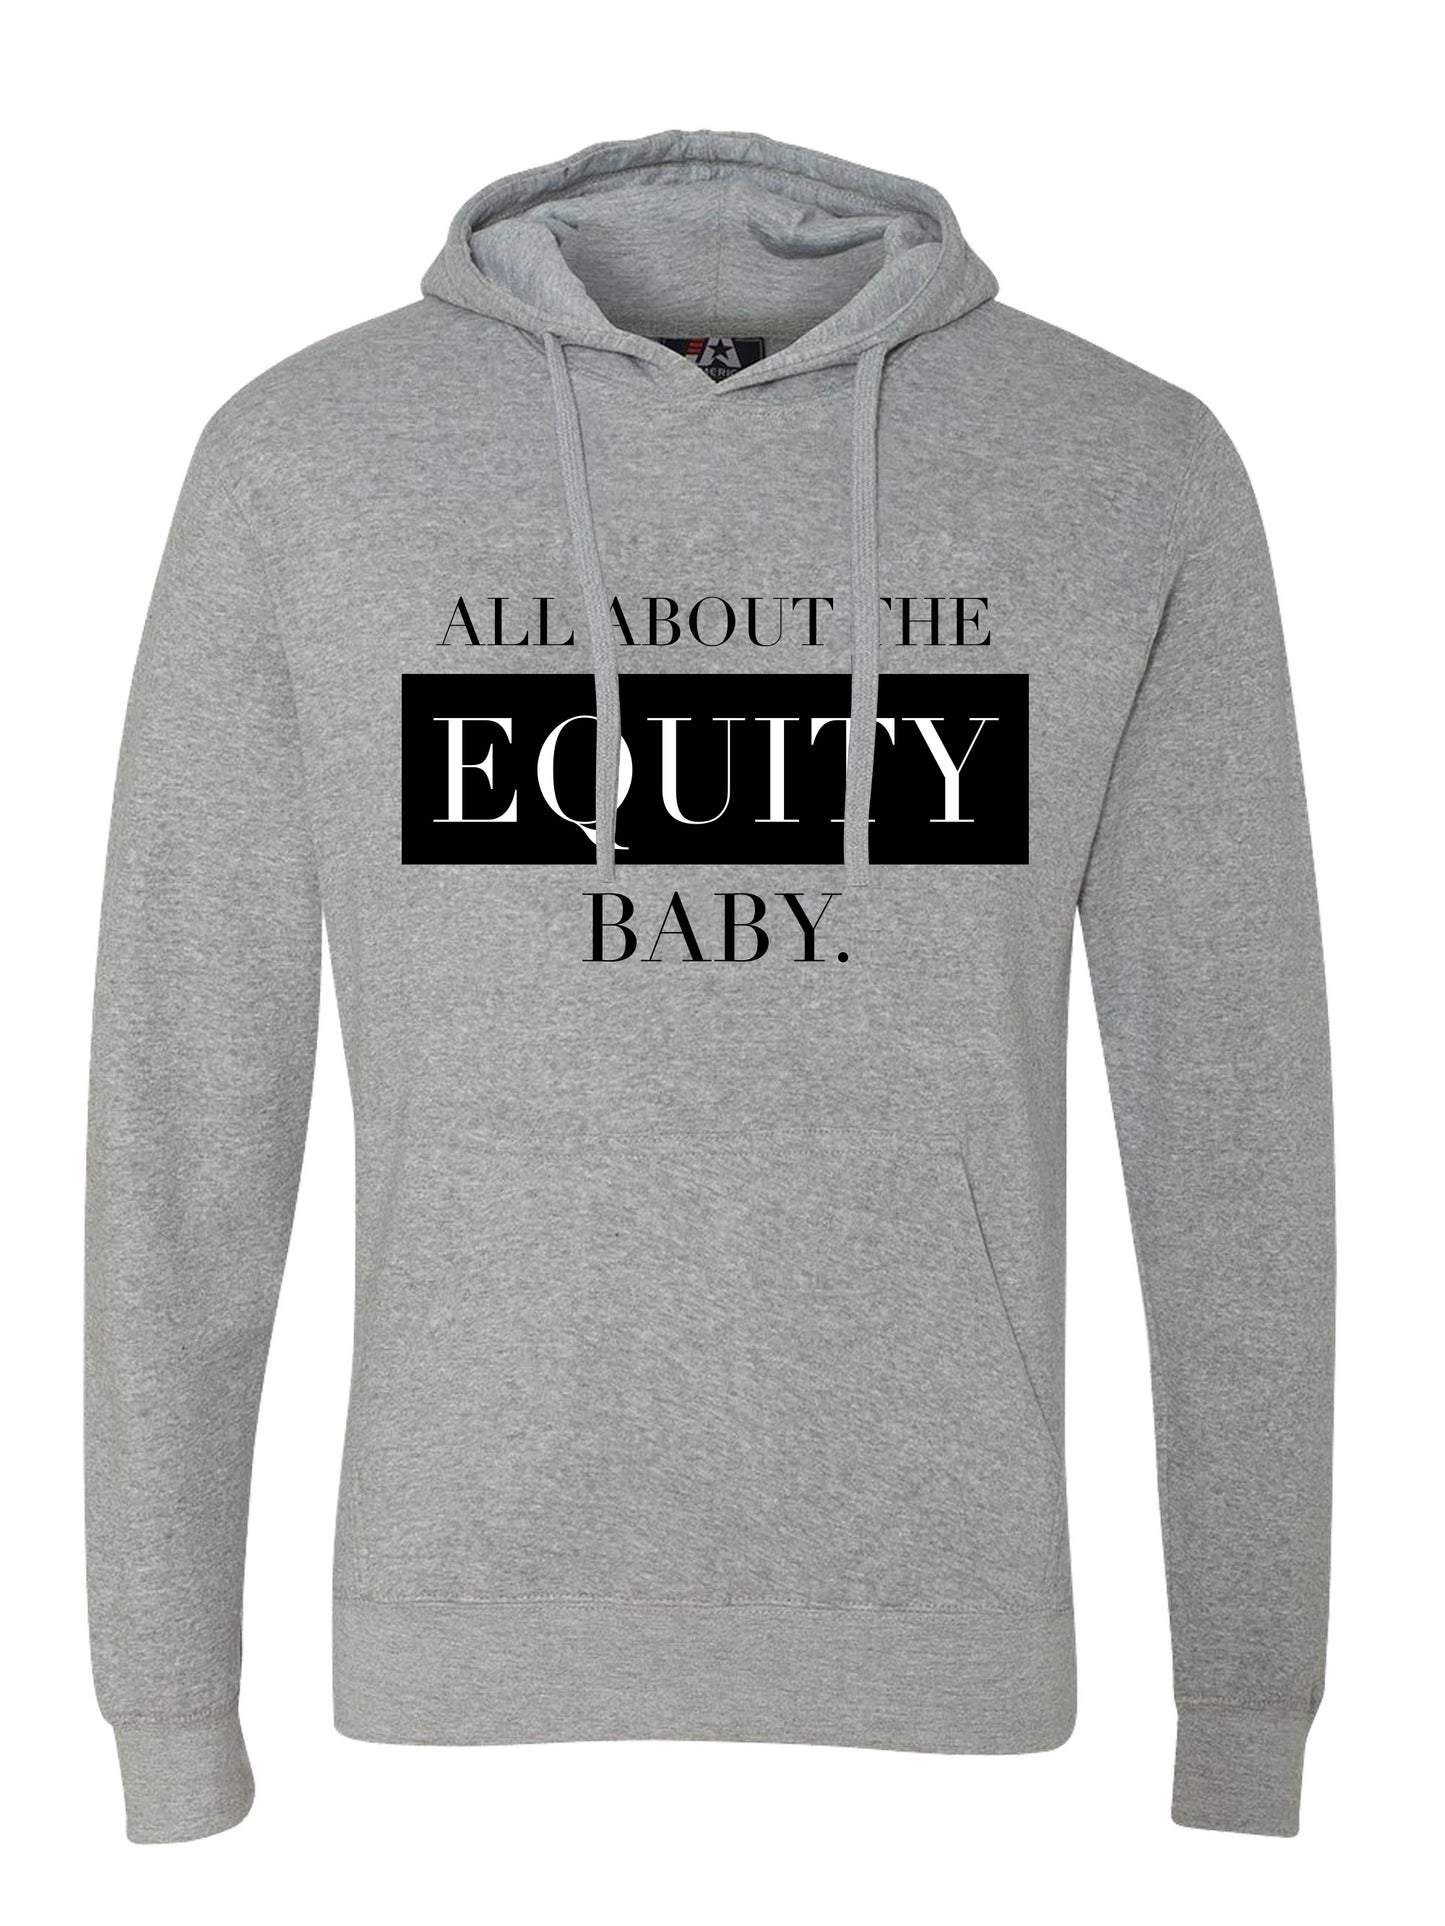 All About The Equity Hoodies